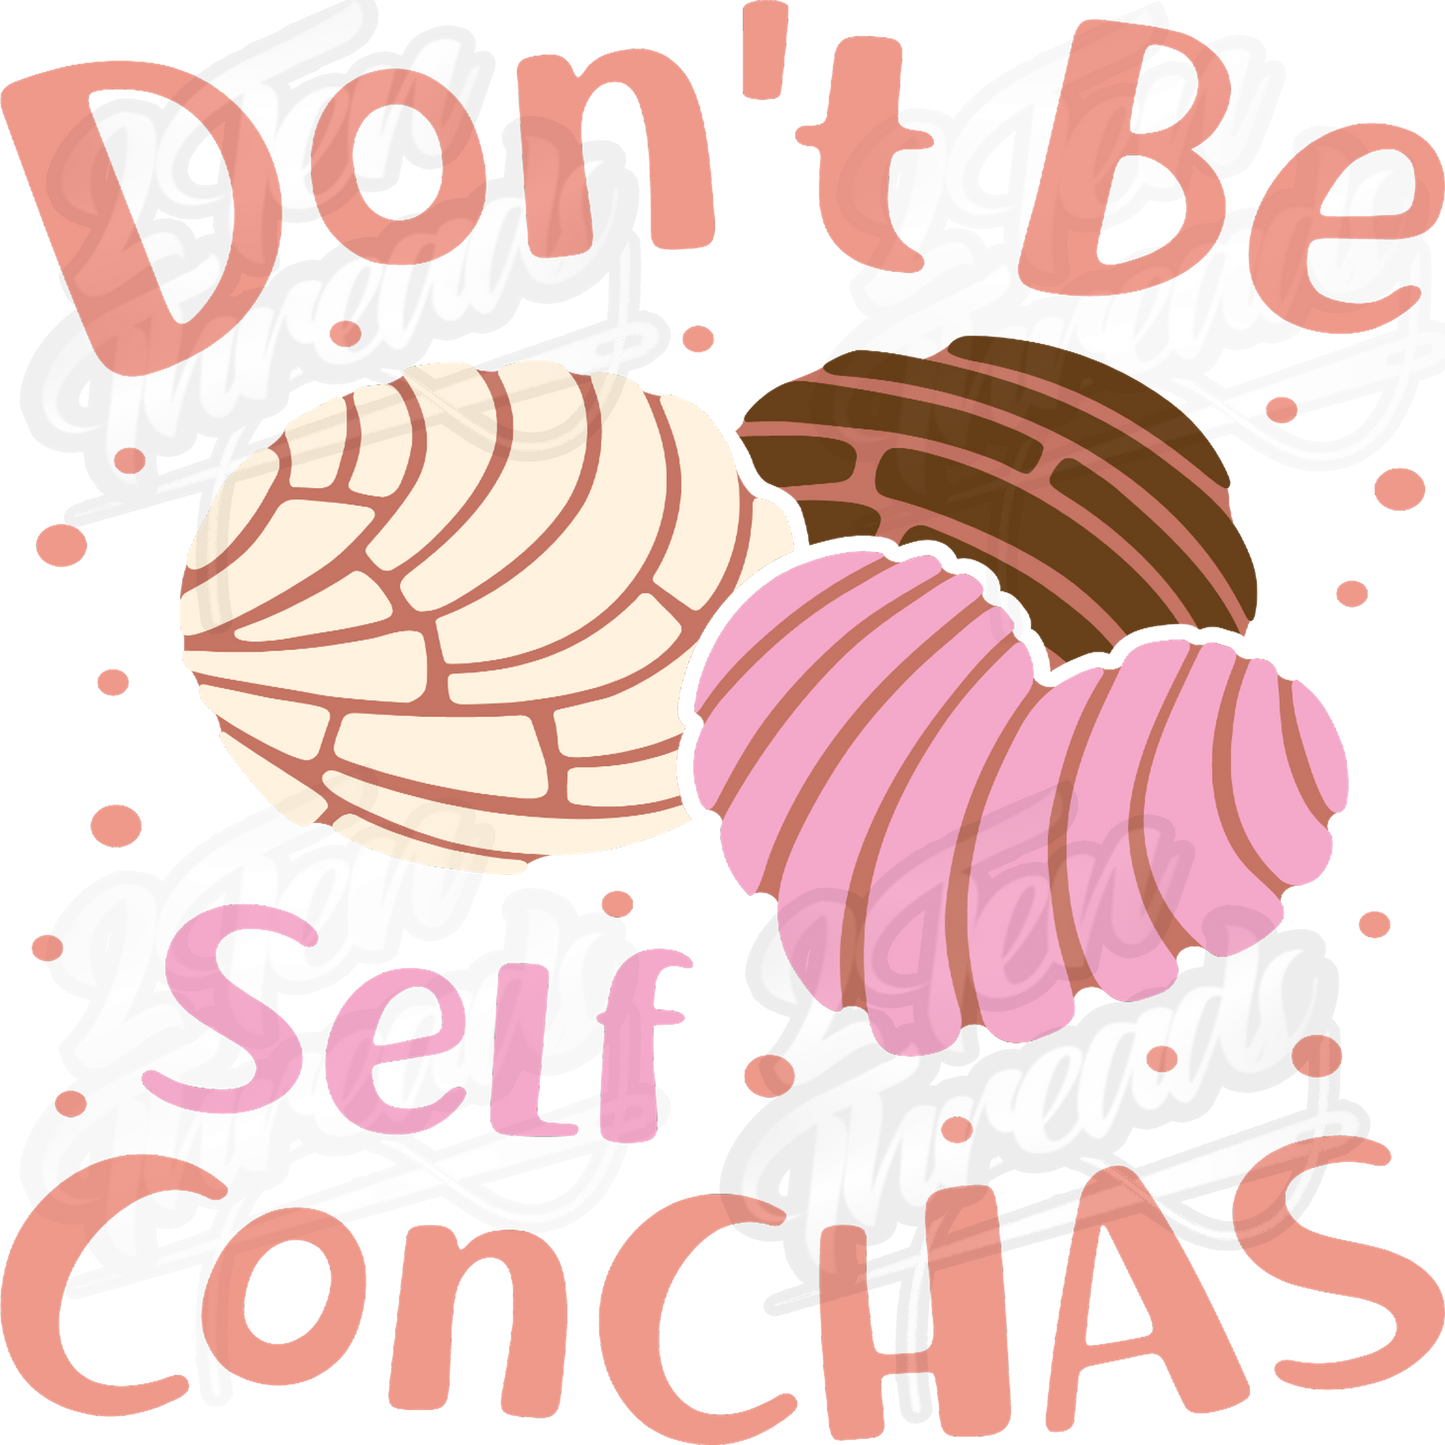 Don't be Self Conchas!